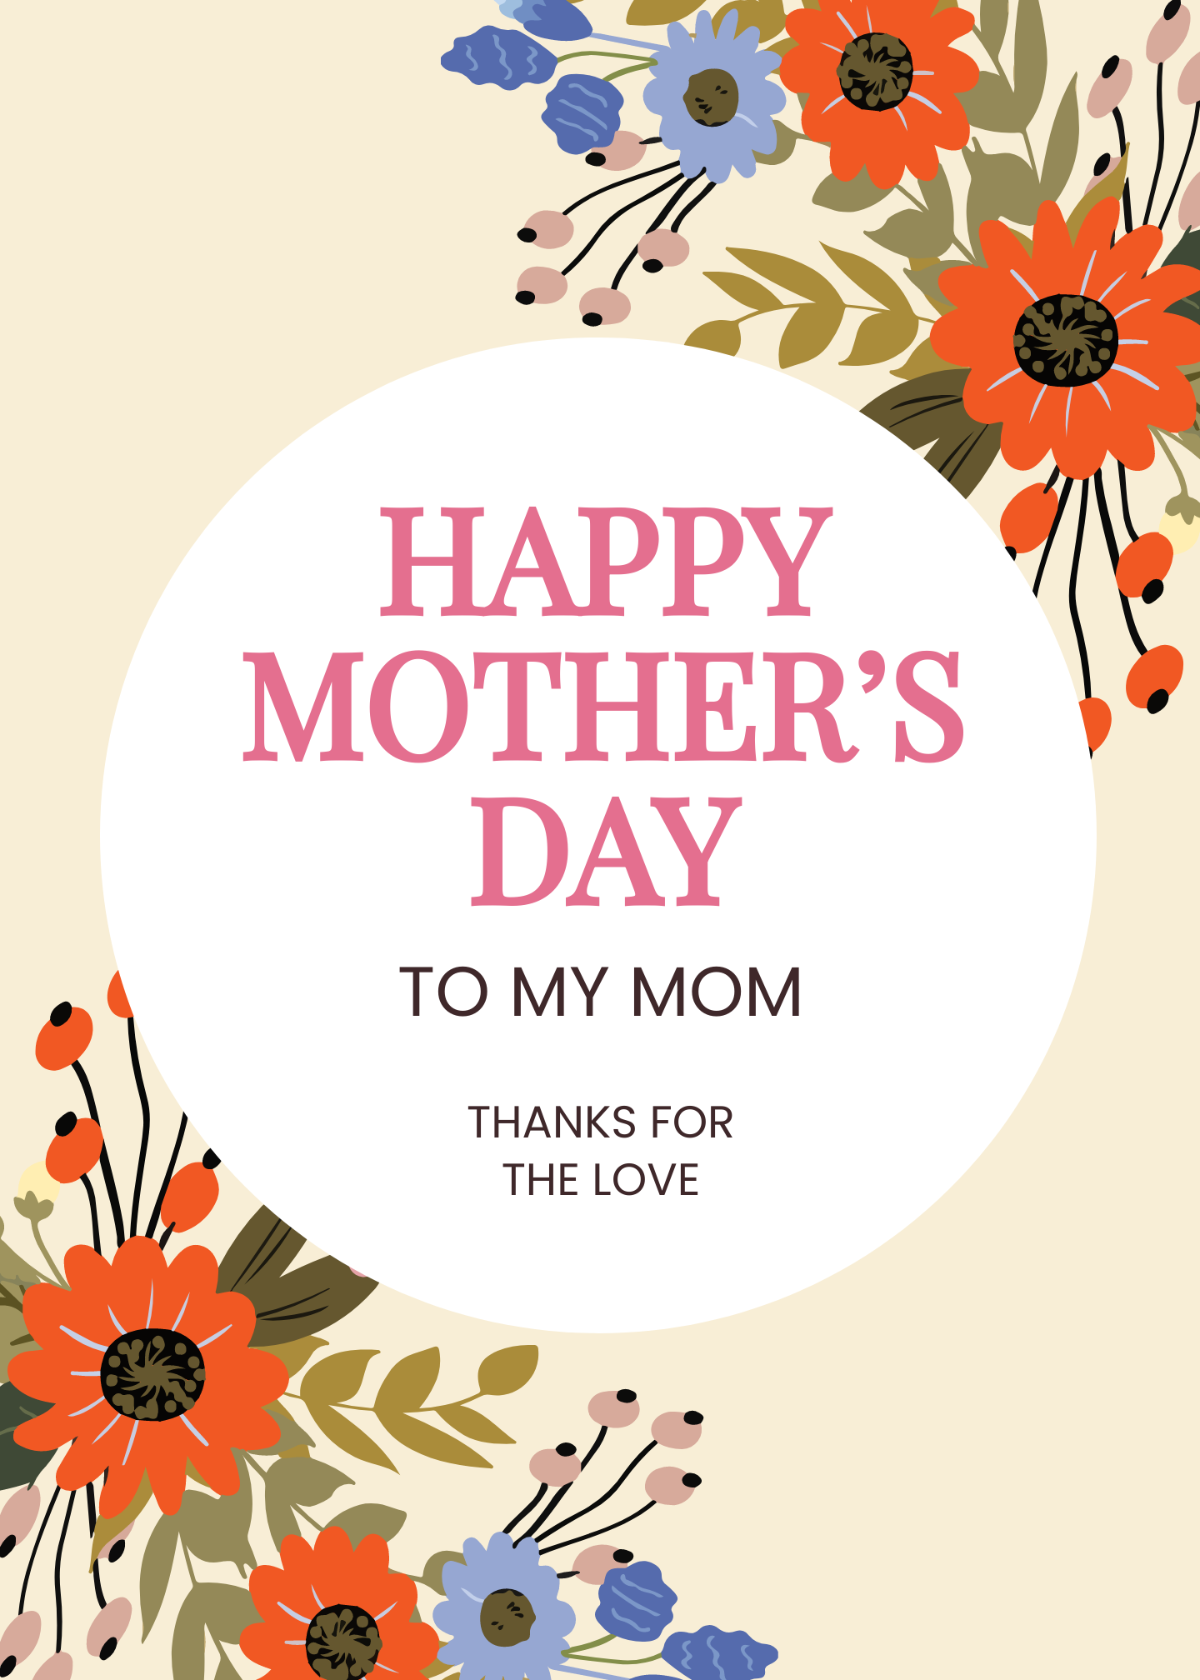 Happy Mother's Day Card Template